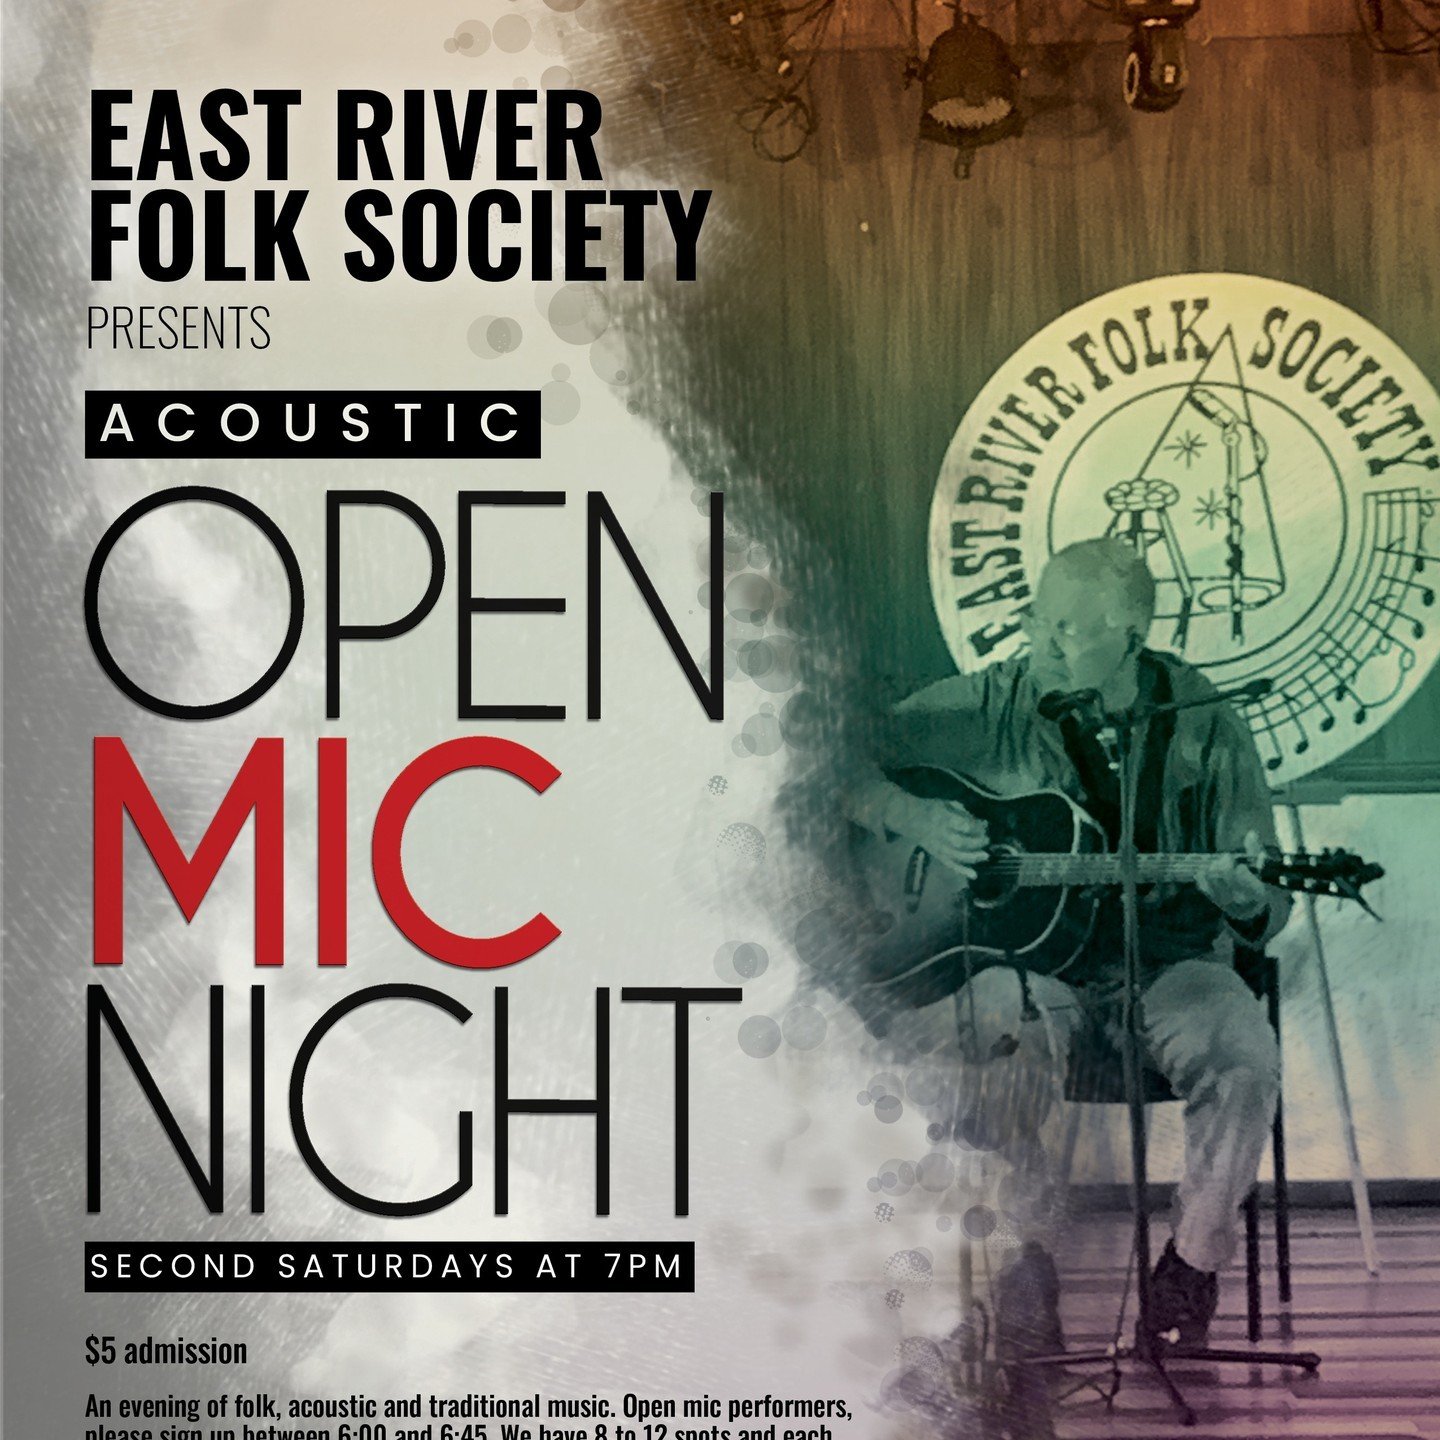 The next East River Folk Society Acoustic Open Mic Night is tomorrow, Saturday, May 11! You&rsquo;ll be in for an evening of folk, acoustic and traditional music starting at 7:00pm. Open mic performers, please sign up between 6:00 and 6:45. We have 8